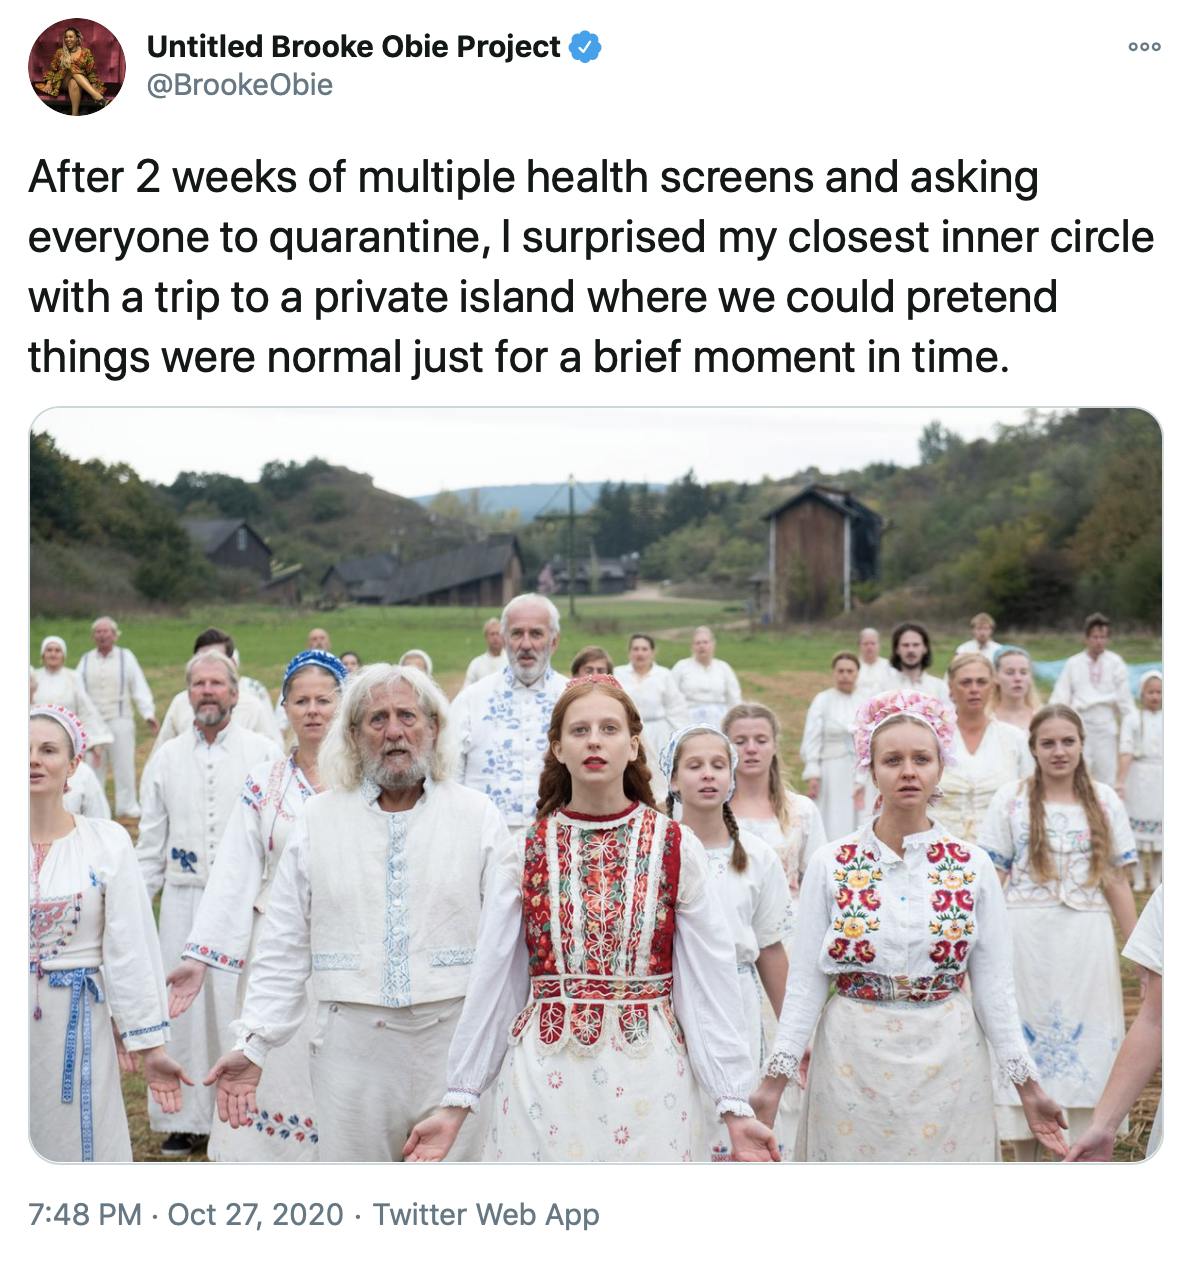 "After 2 weeks of multiple health screens and asking everyone to quarantine, I surprised my closest inner circle with a trip to a private island where we could pretend things were normal just for a brief moment in time." screen grab from Misdummer of the people gathered in their white embroidered clothes